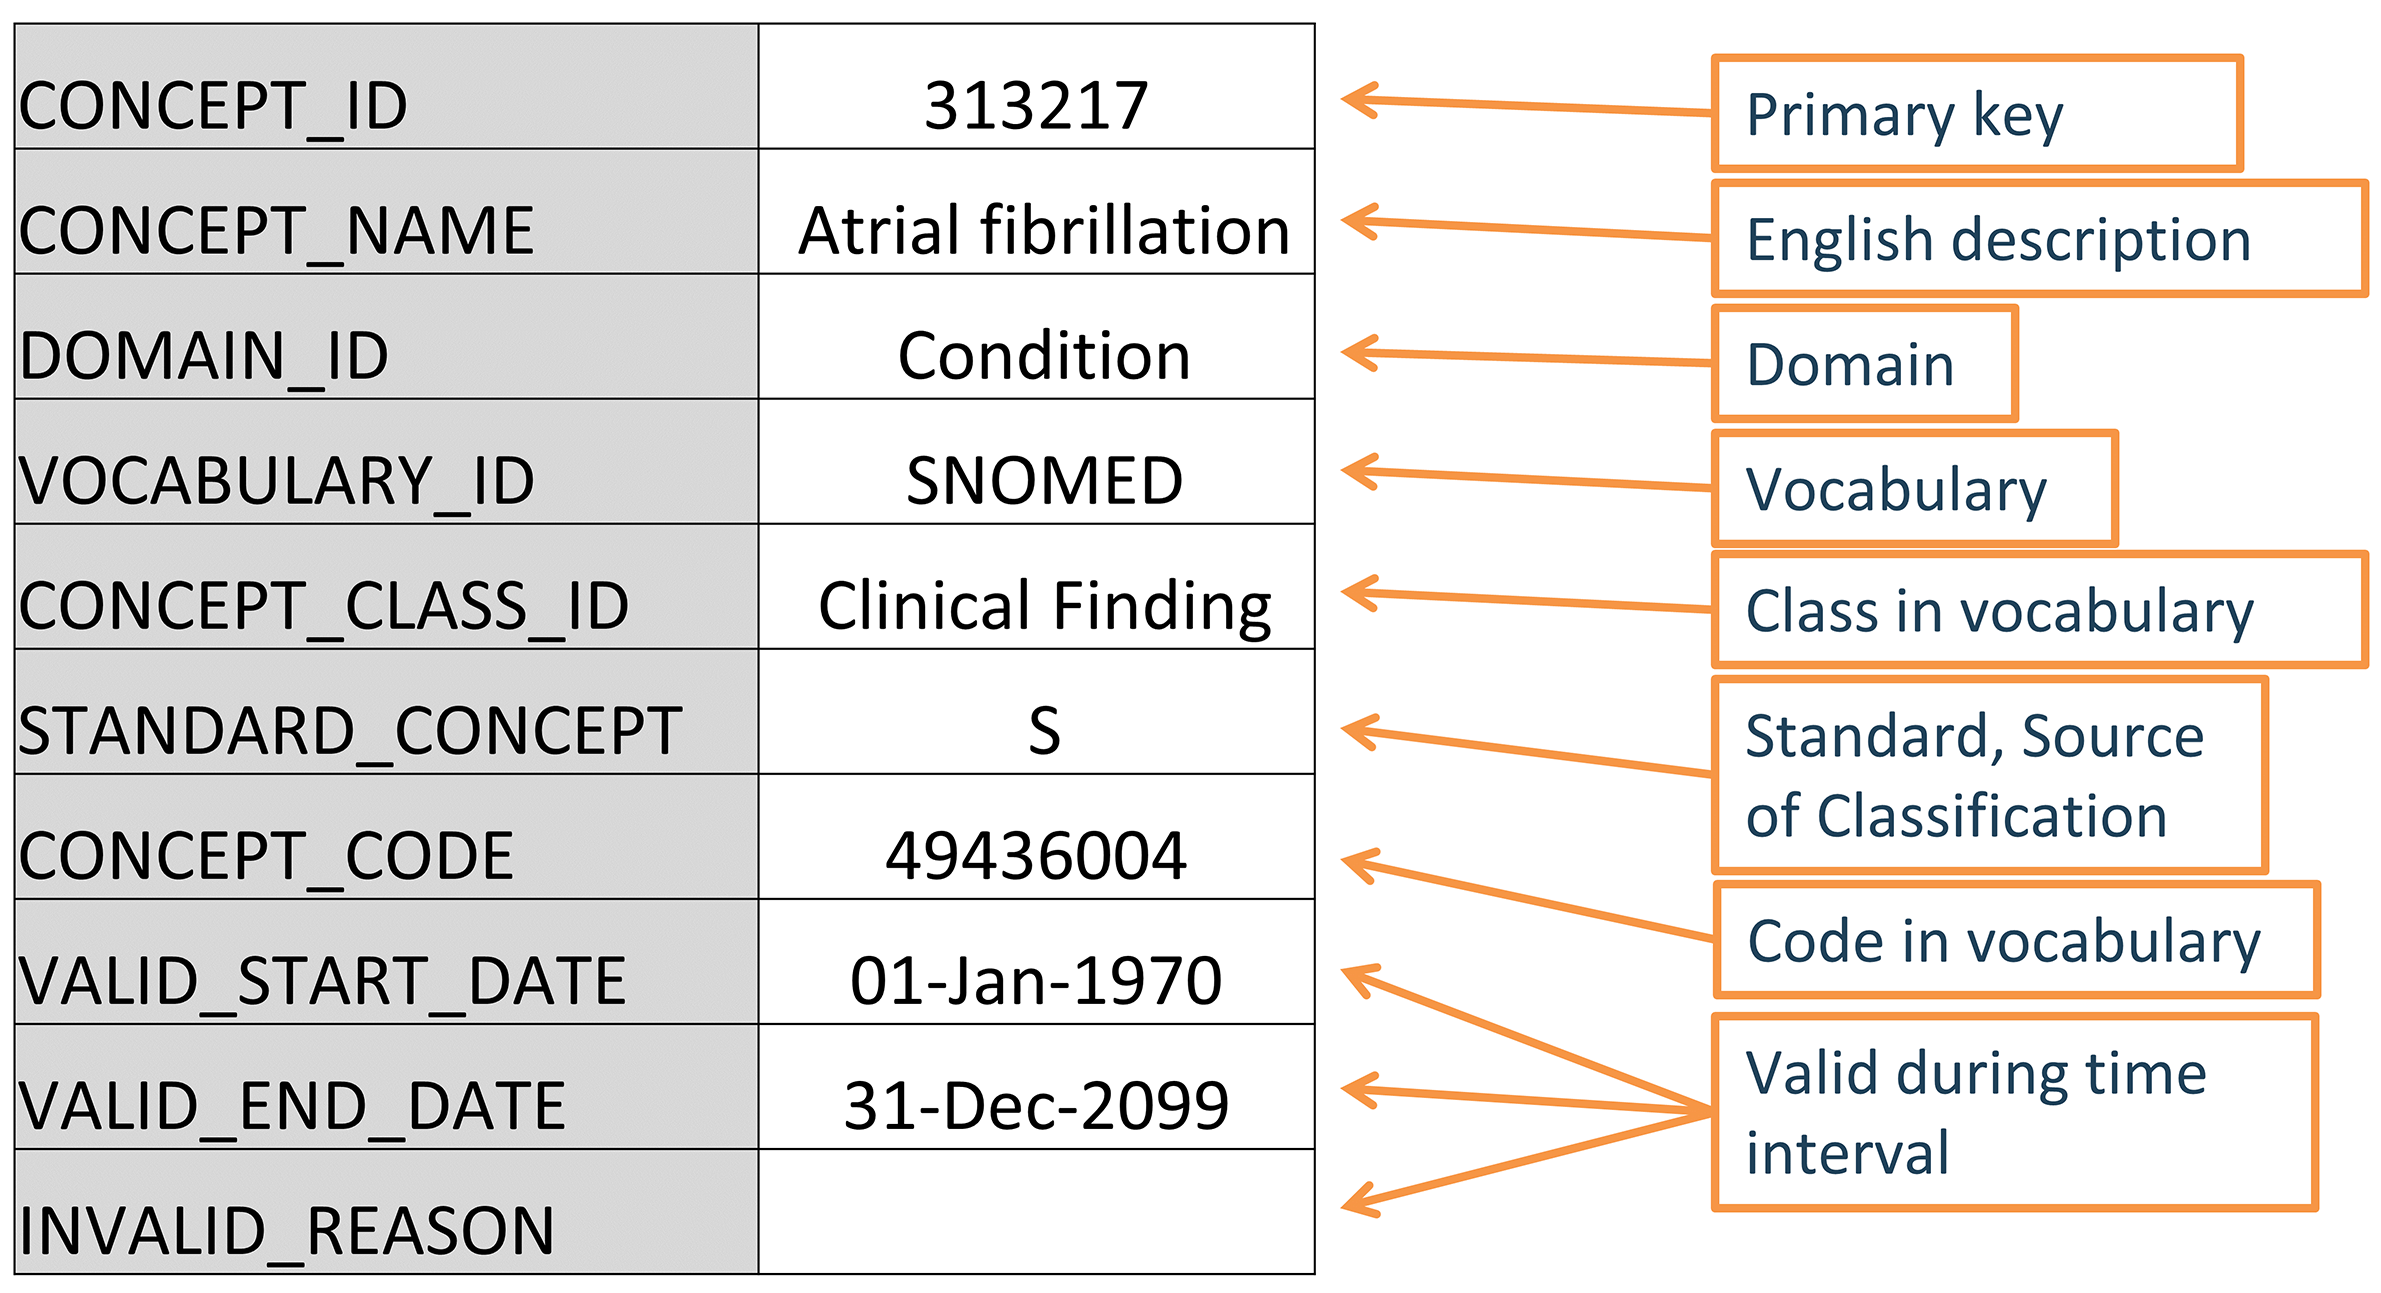 Standard representation of vocabulary concepts in the OMOP CDM. The example provided is the CONCEPT table record for the SNOMED code for Atrial Fibrillation.